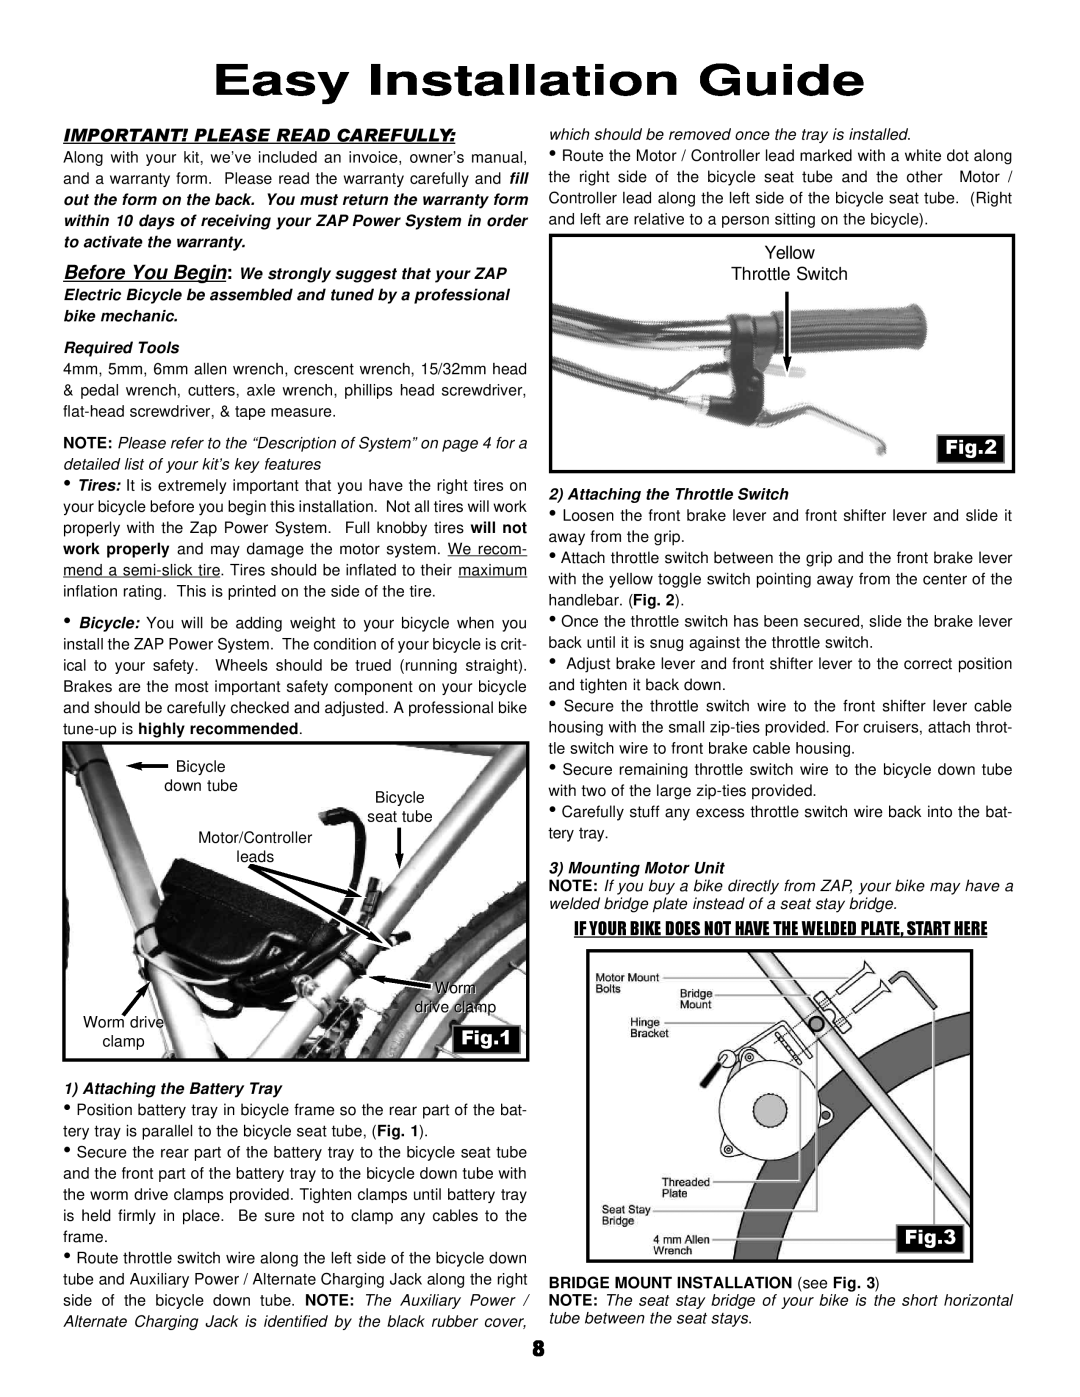 Zap DX owner manual Easy Installation Guide, If Your Bike Does Not Have The Welded Plate, Start Here, Required Tools 